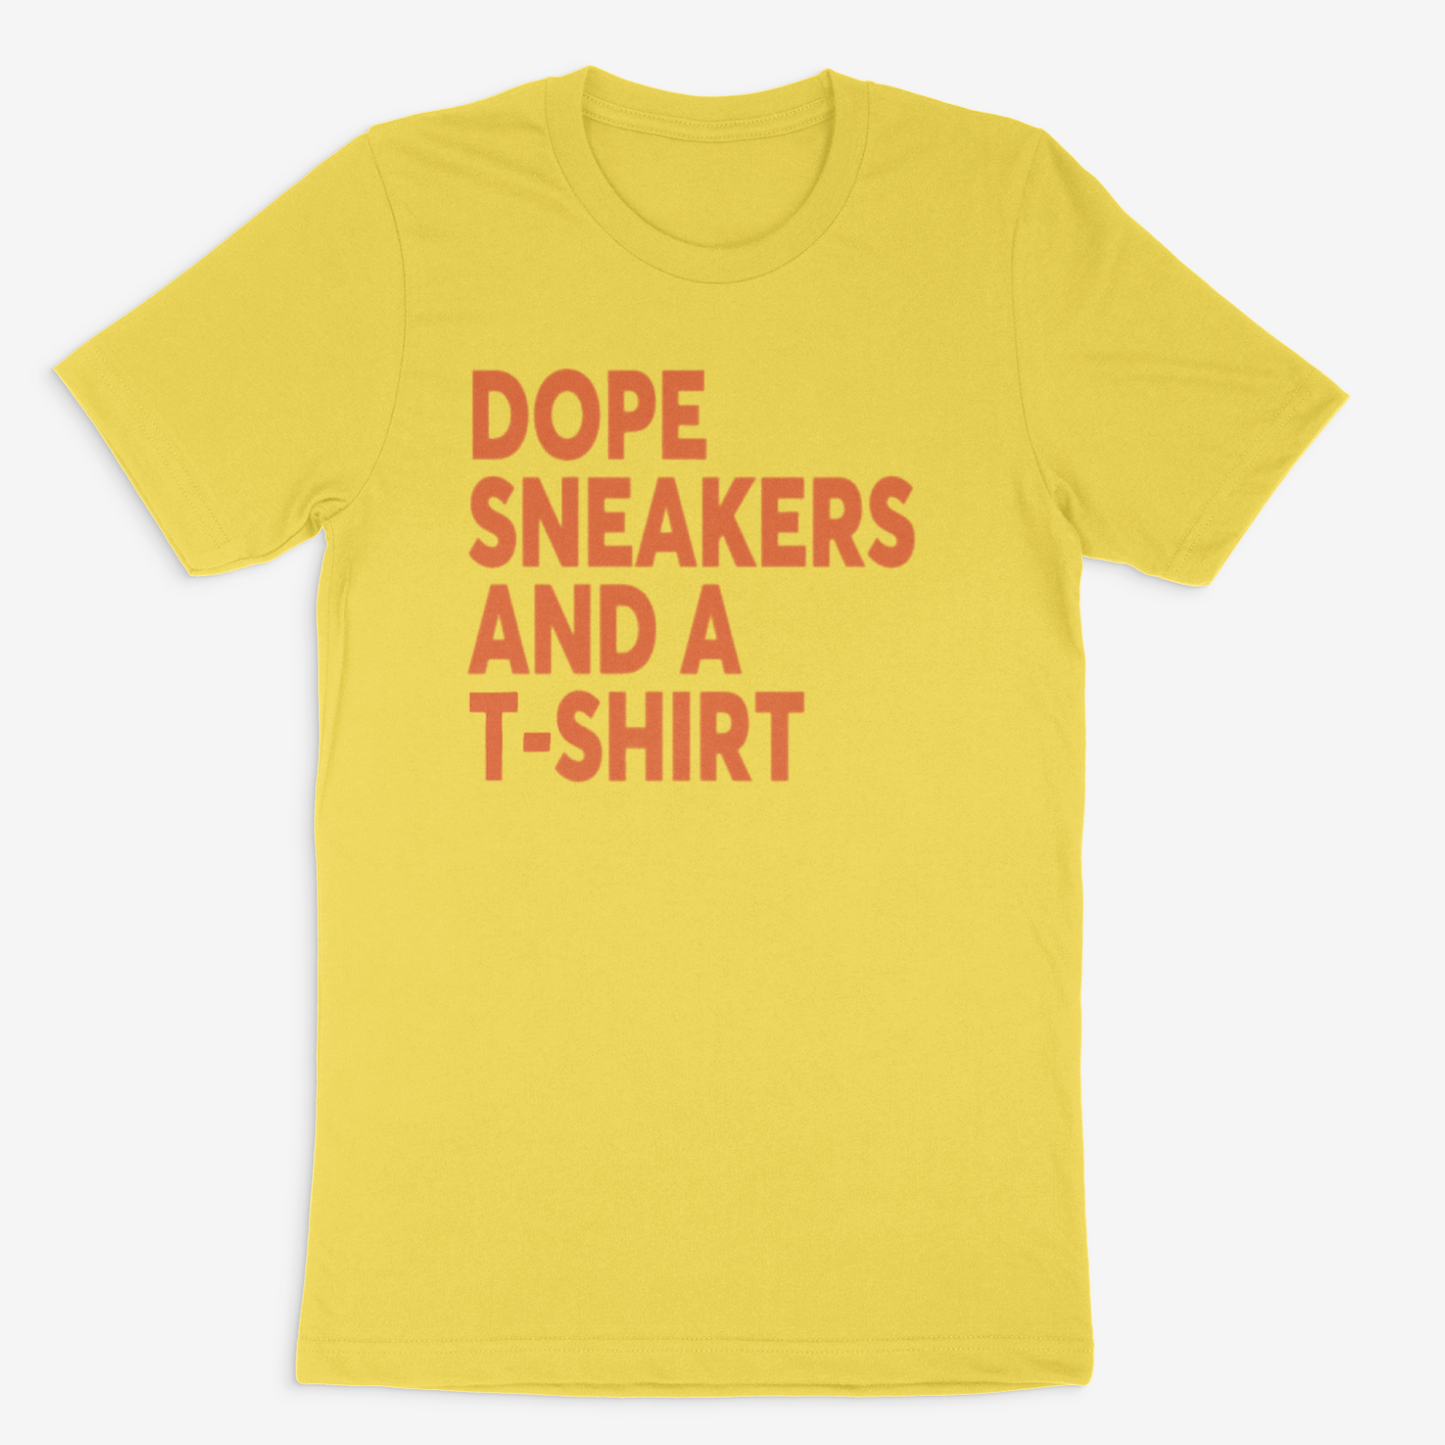 Dope Sneakers and a T-Shirt (Orange)